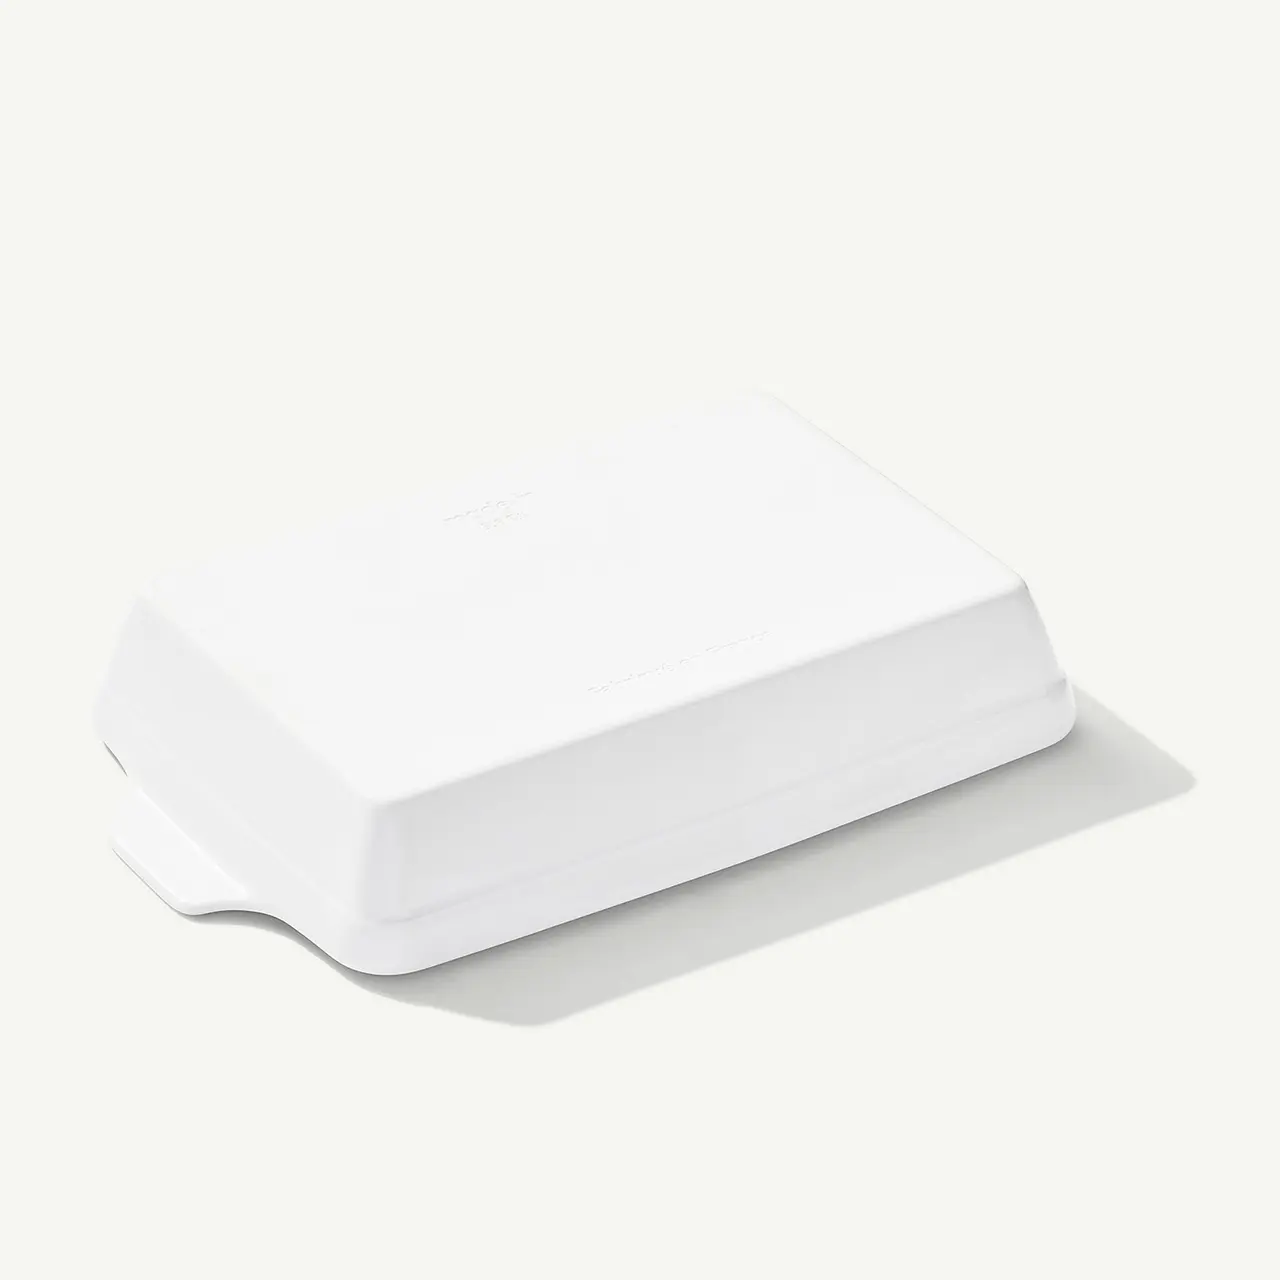 A sleek white wireless router with minimalistic design sits on a plain surface.